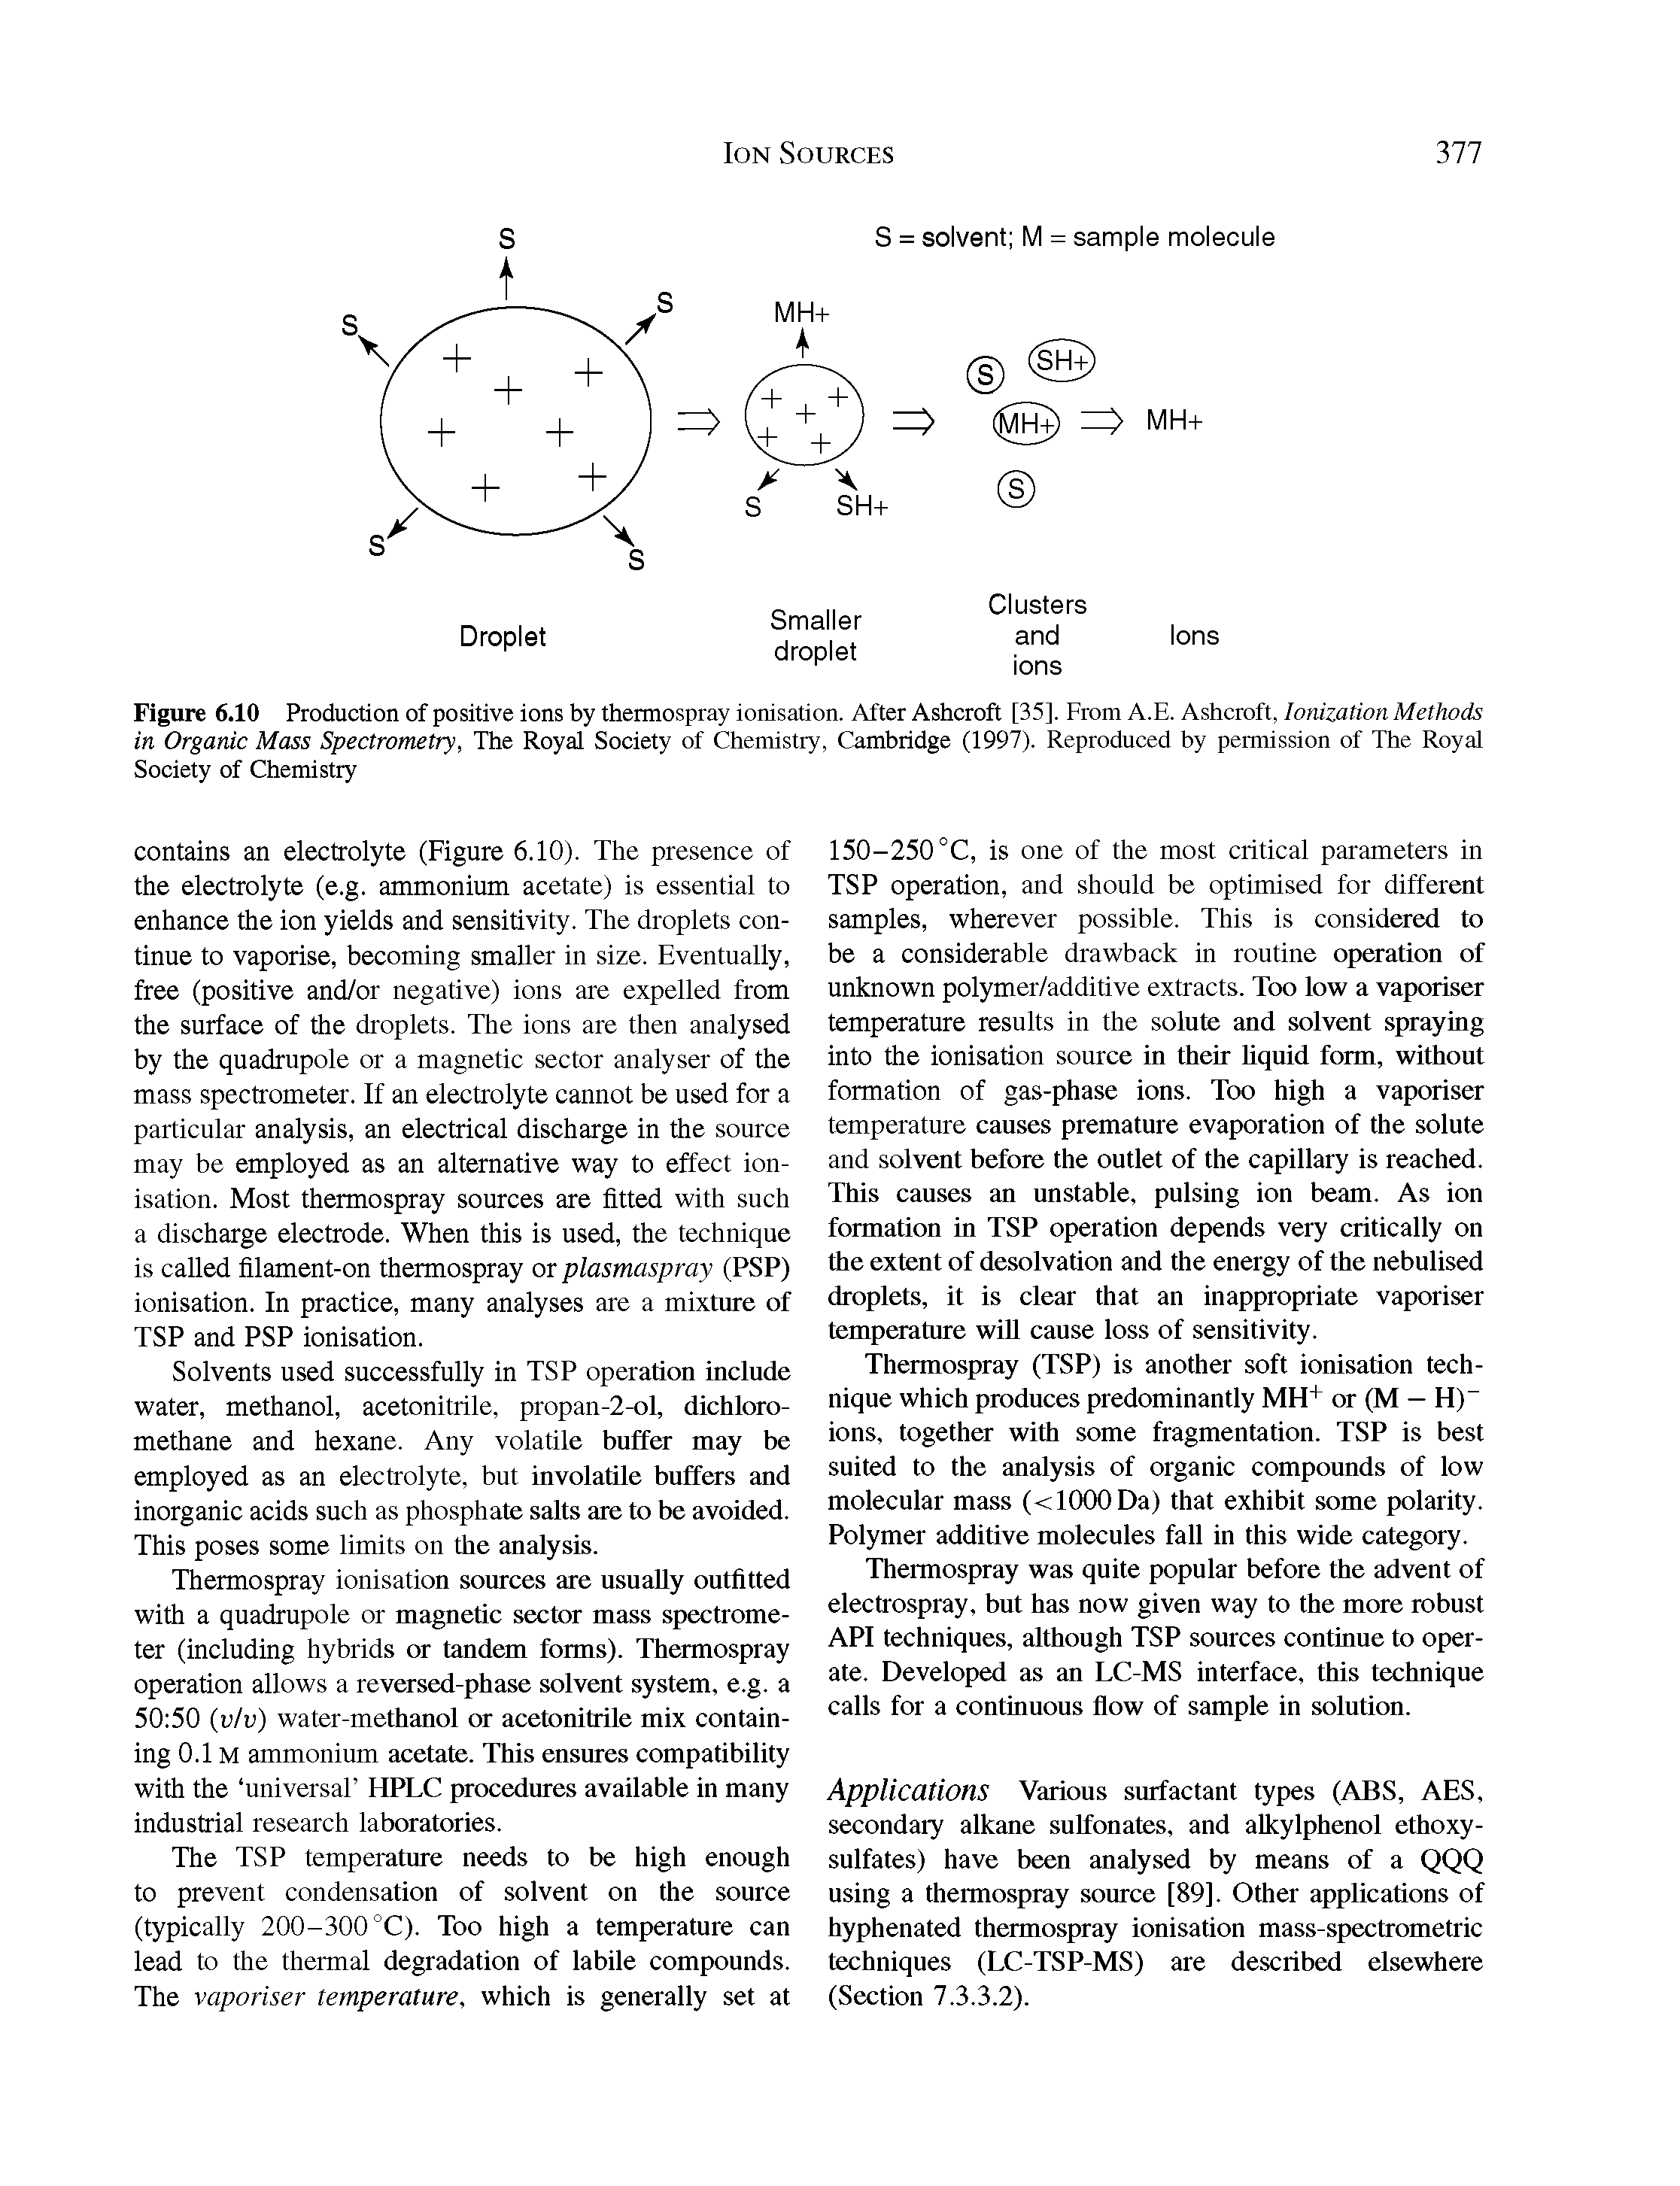 Figure 6.10 Production of positive ions by thermospray ionisation. After Ashcroft [35]. From A.E. Ashcroft, Ionization Methods in Organic Mass Spectrometry, The Royal Society of Chemistry, Cambridge (1997). Reproduced by permission of The Royal Society of Chemistry...